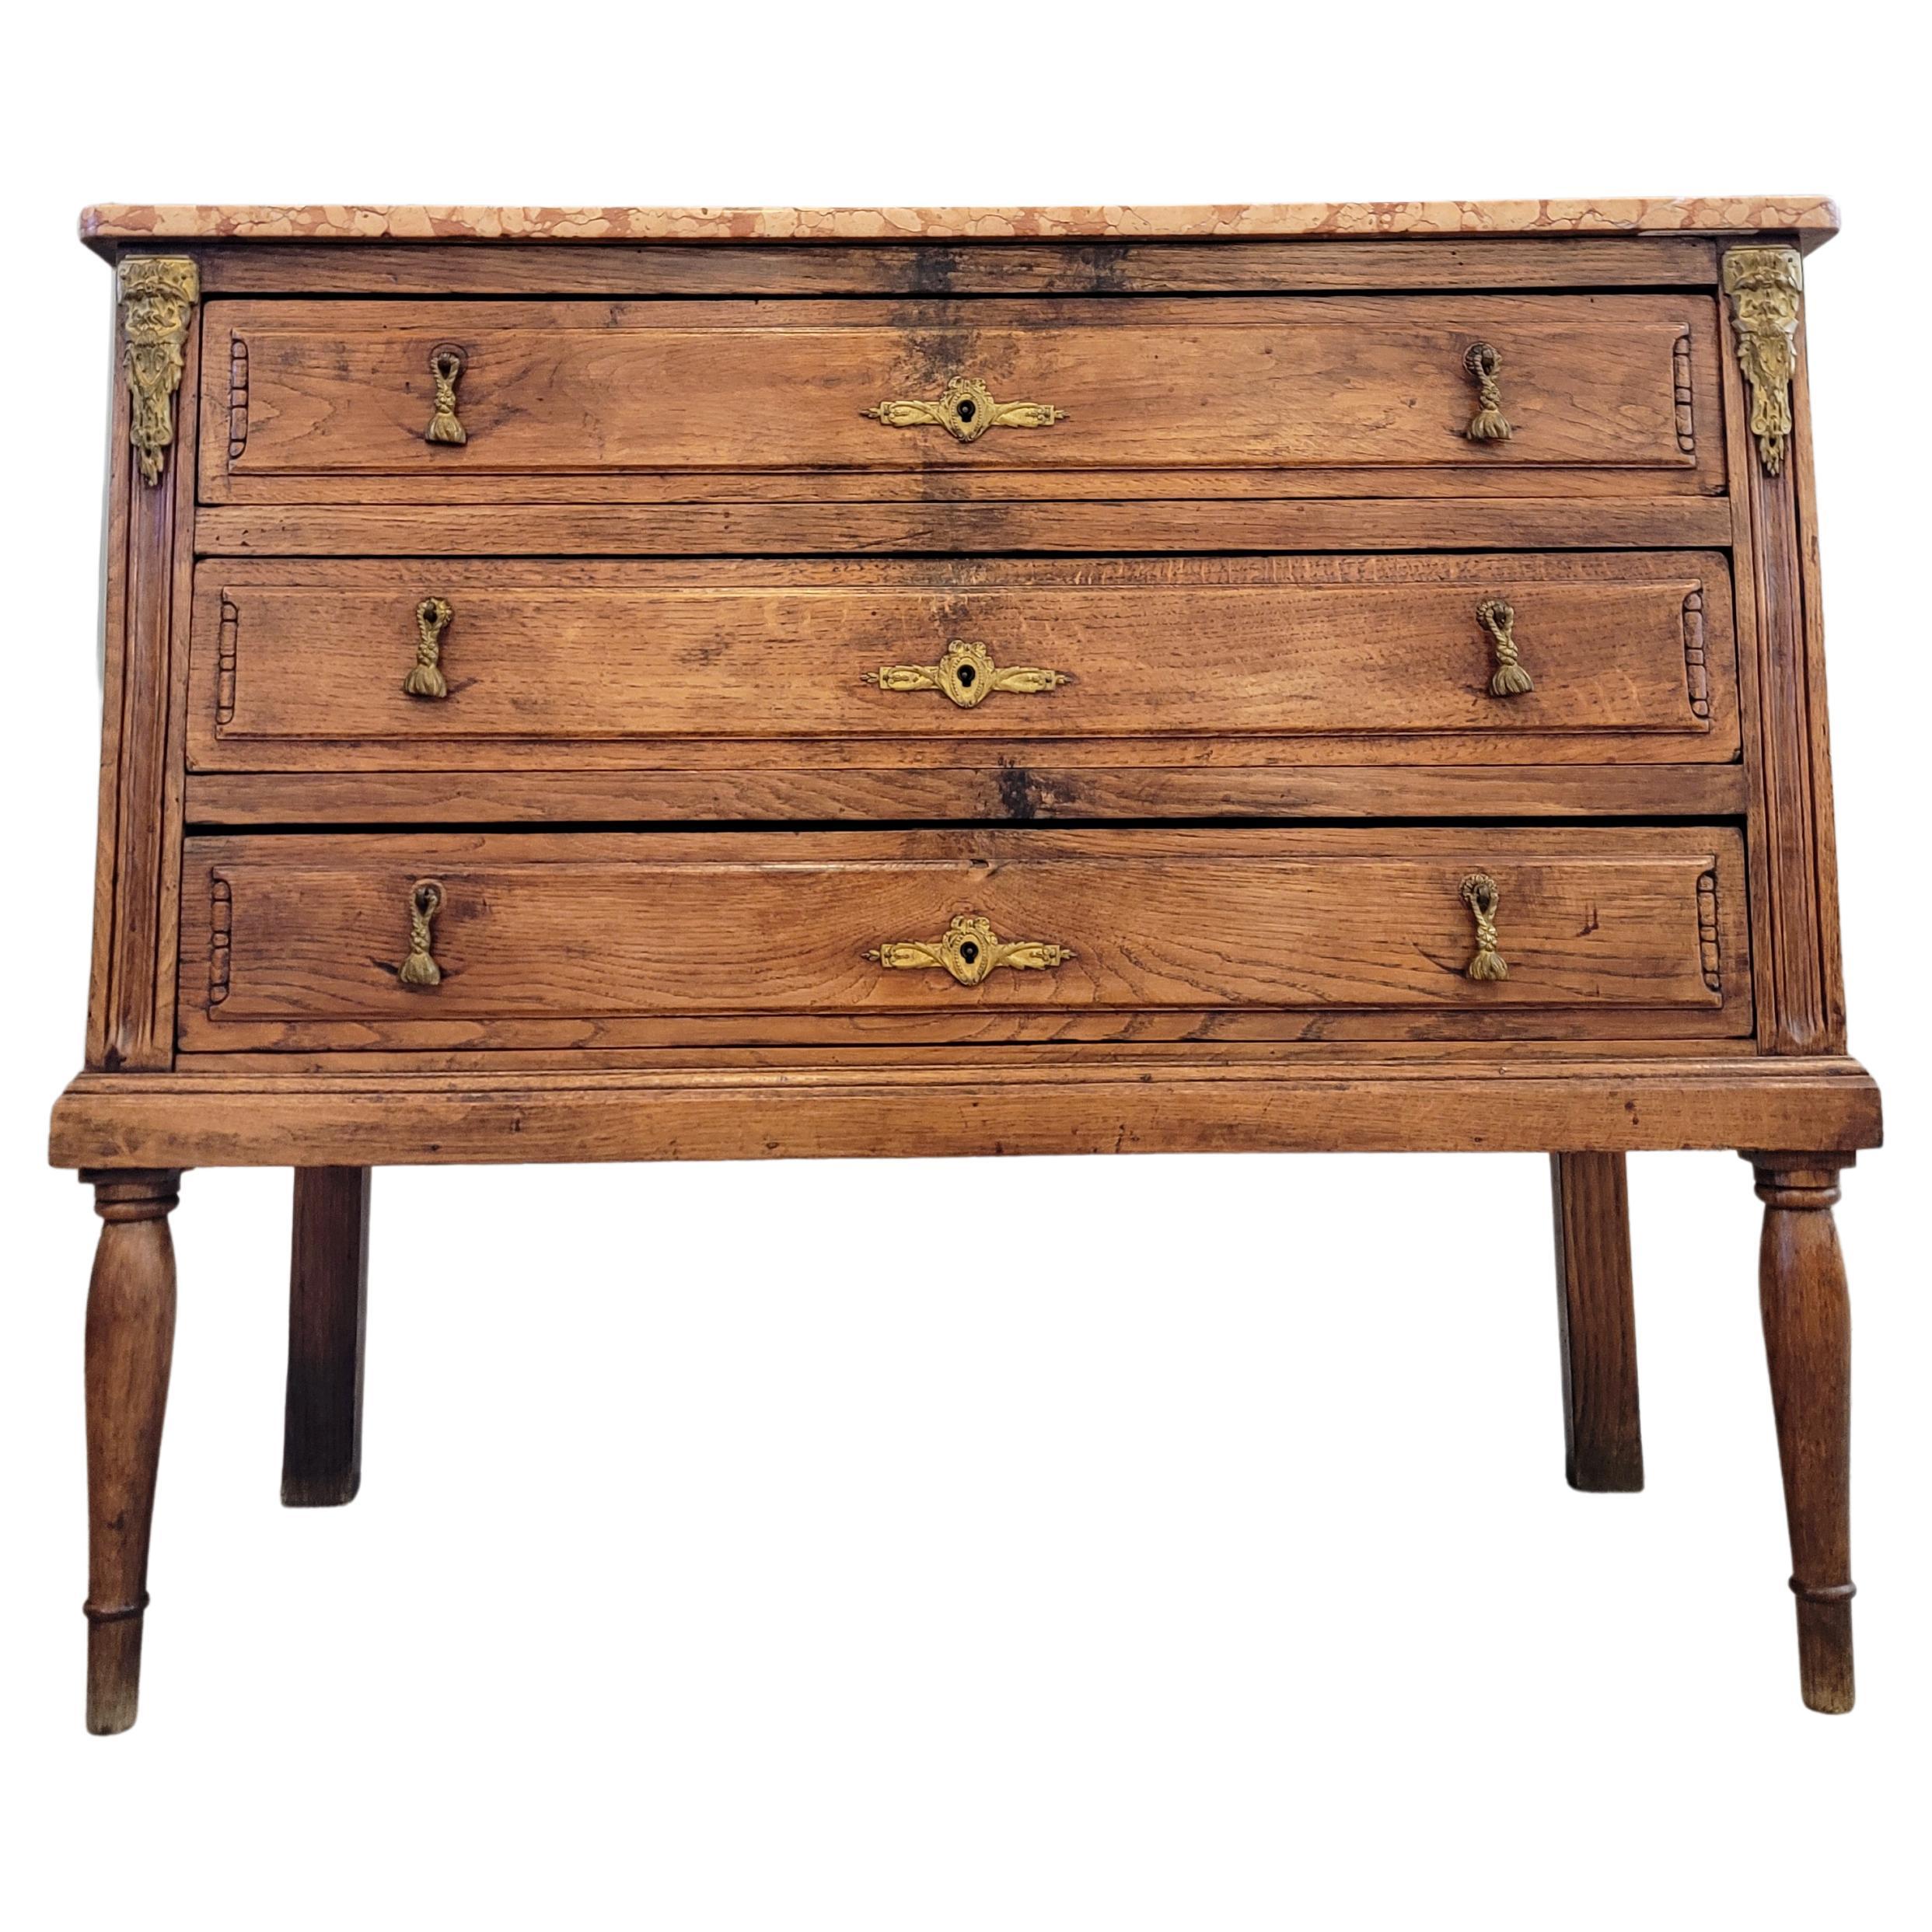 18th/19th Century Country French Louis XVI Oak Chest Of Drawers Commode